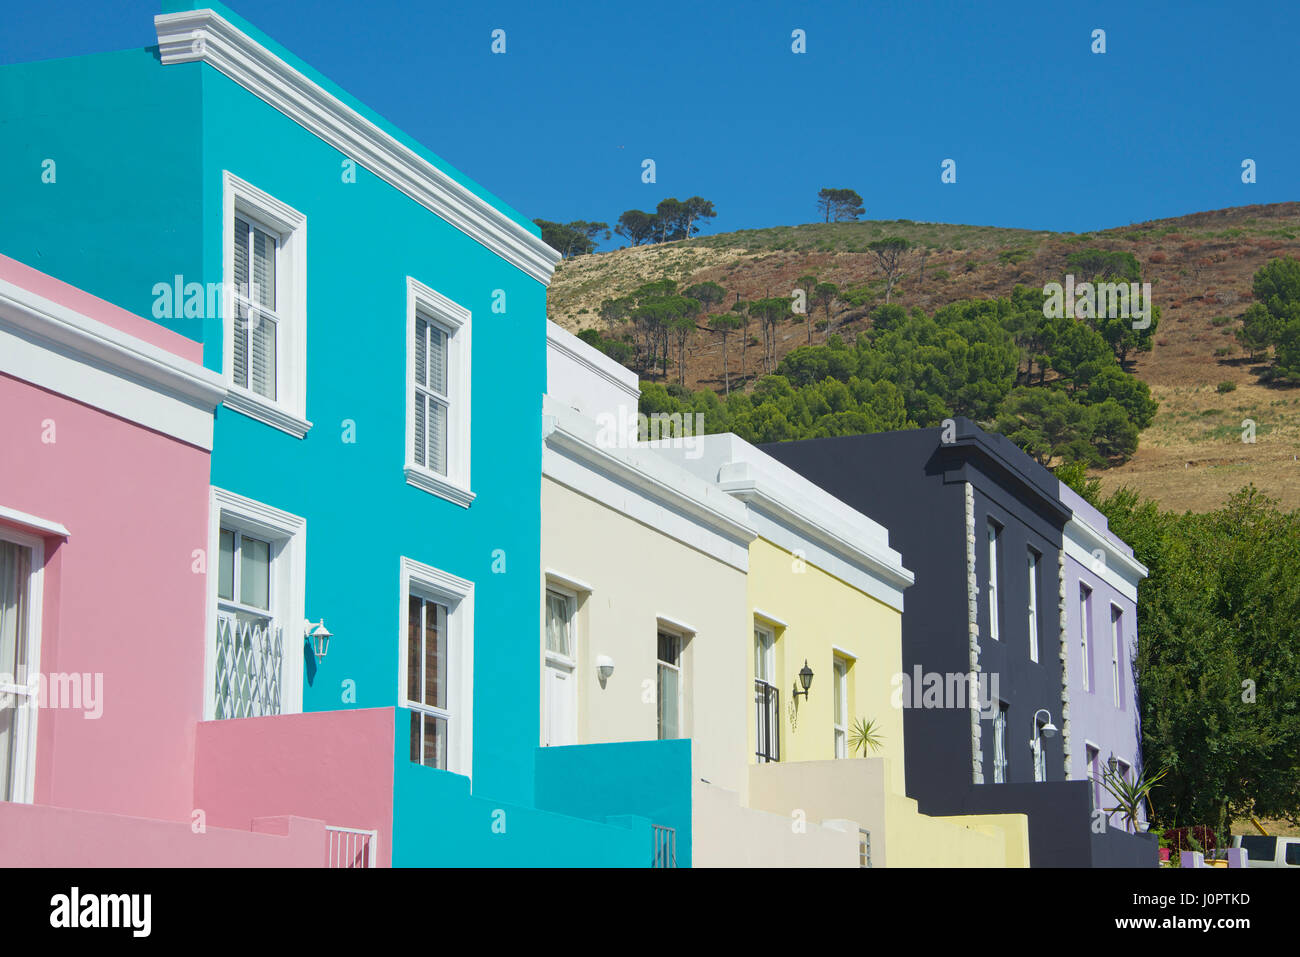 Colourful painted houses Wales Street Bo Kaap Cape Town South Africa Stock Photo